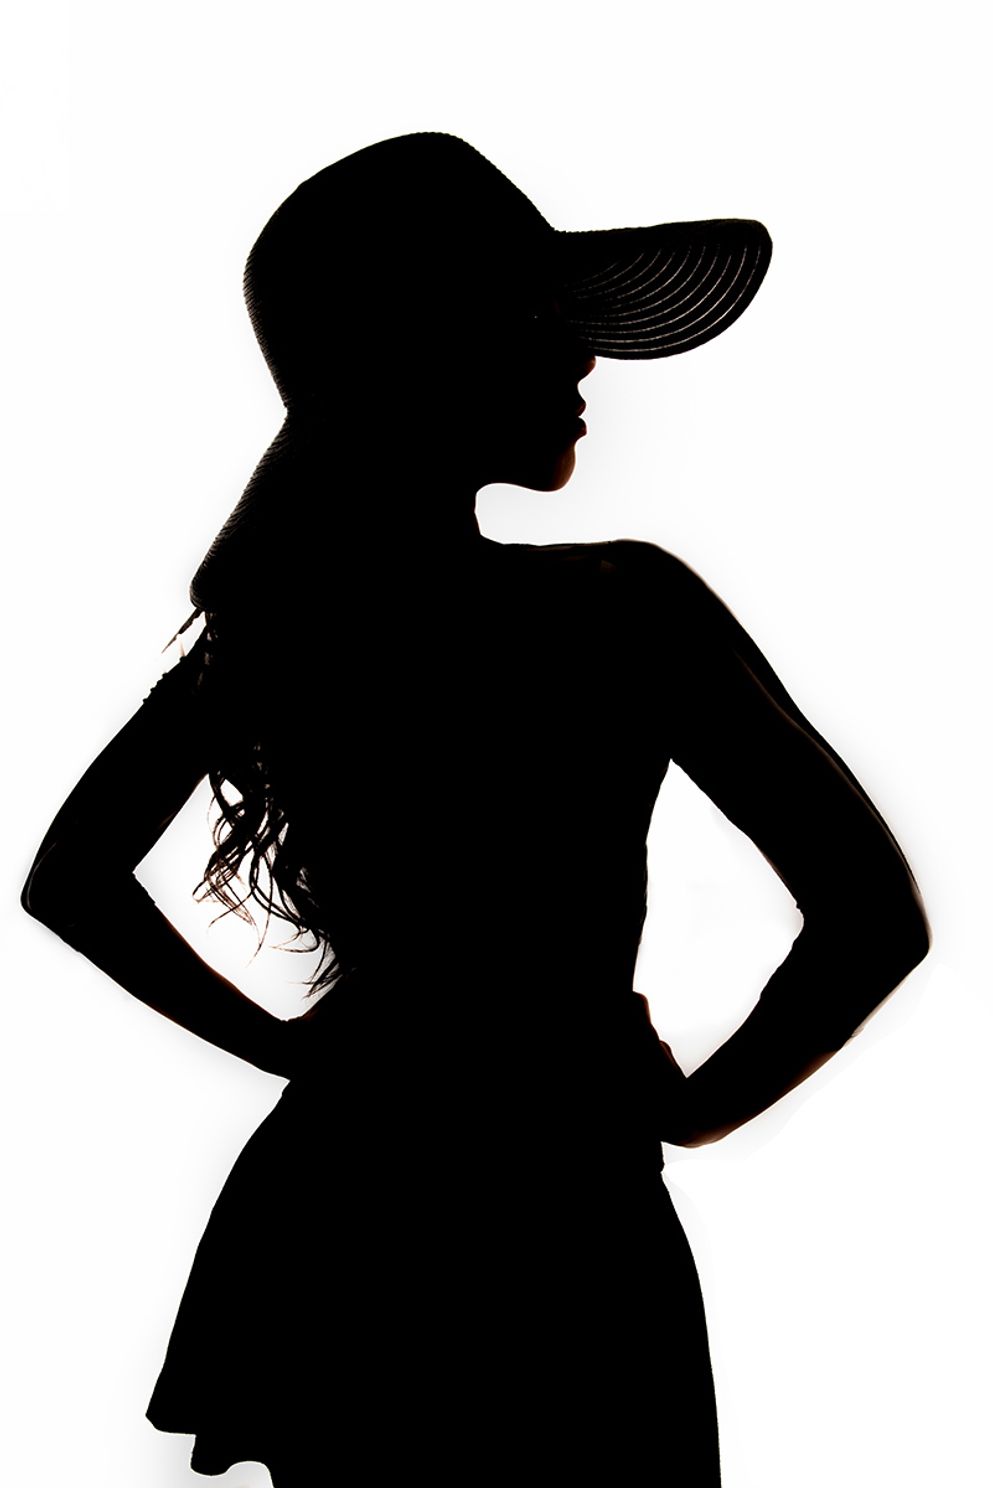 perfect silhouette of a woman wearing a hat with her back facing the camera looking off to the side